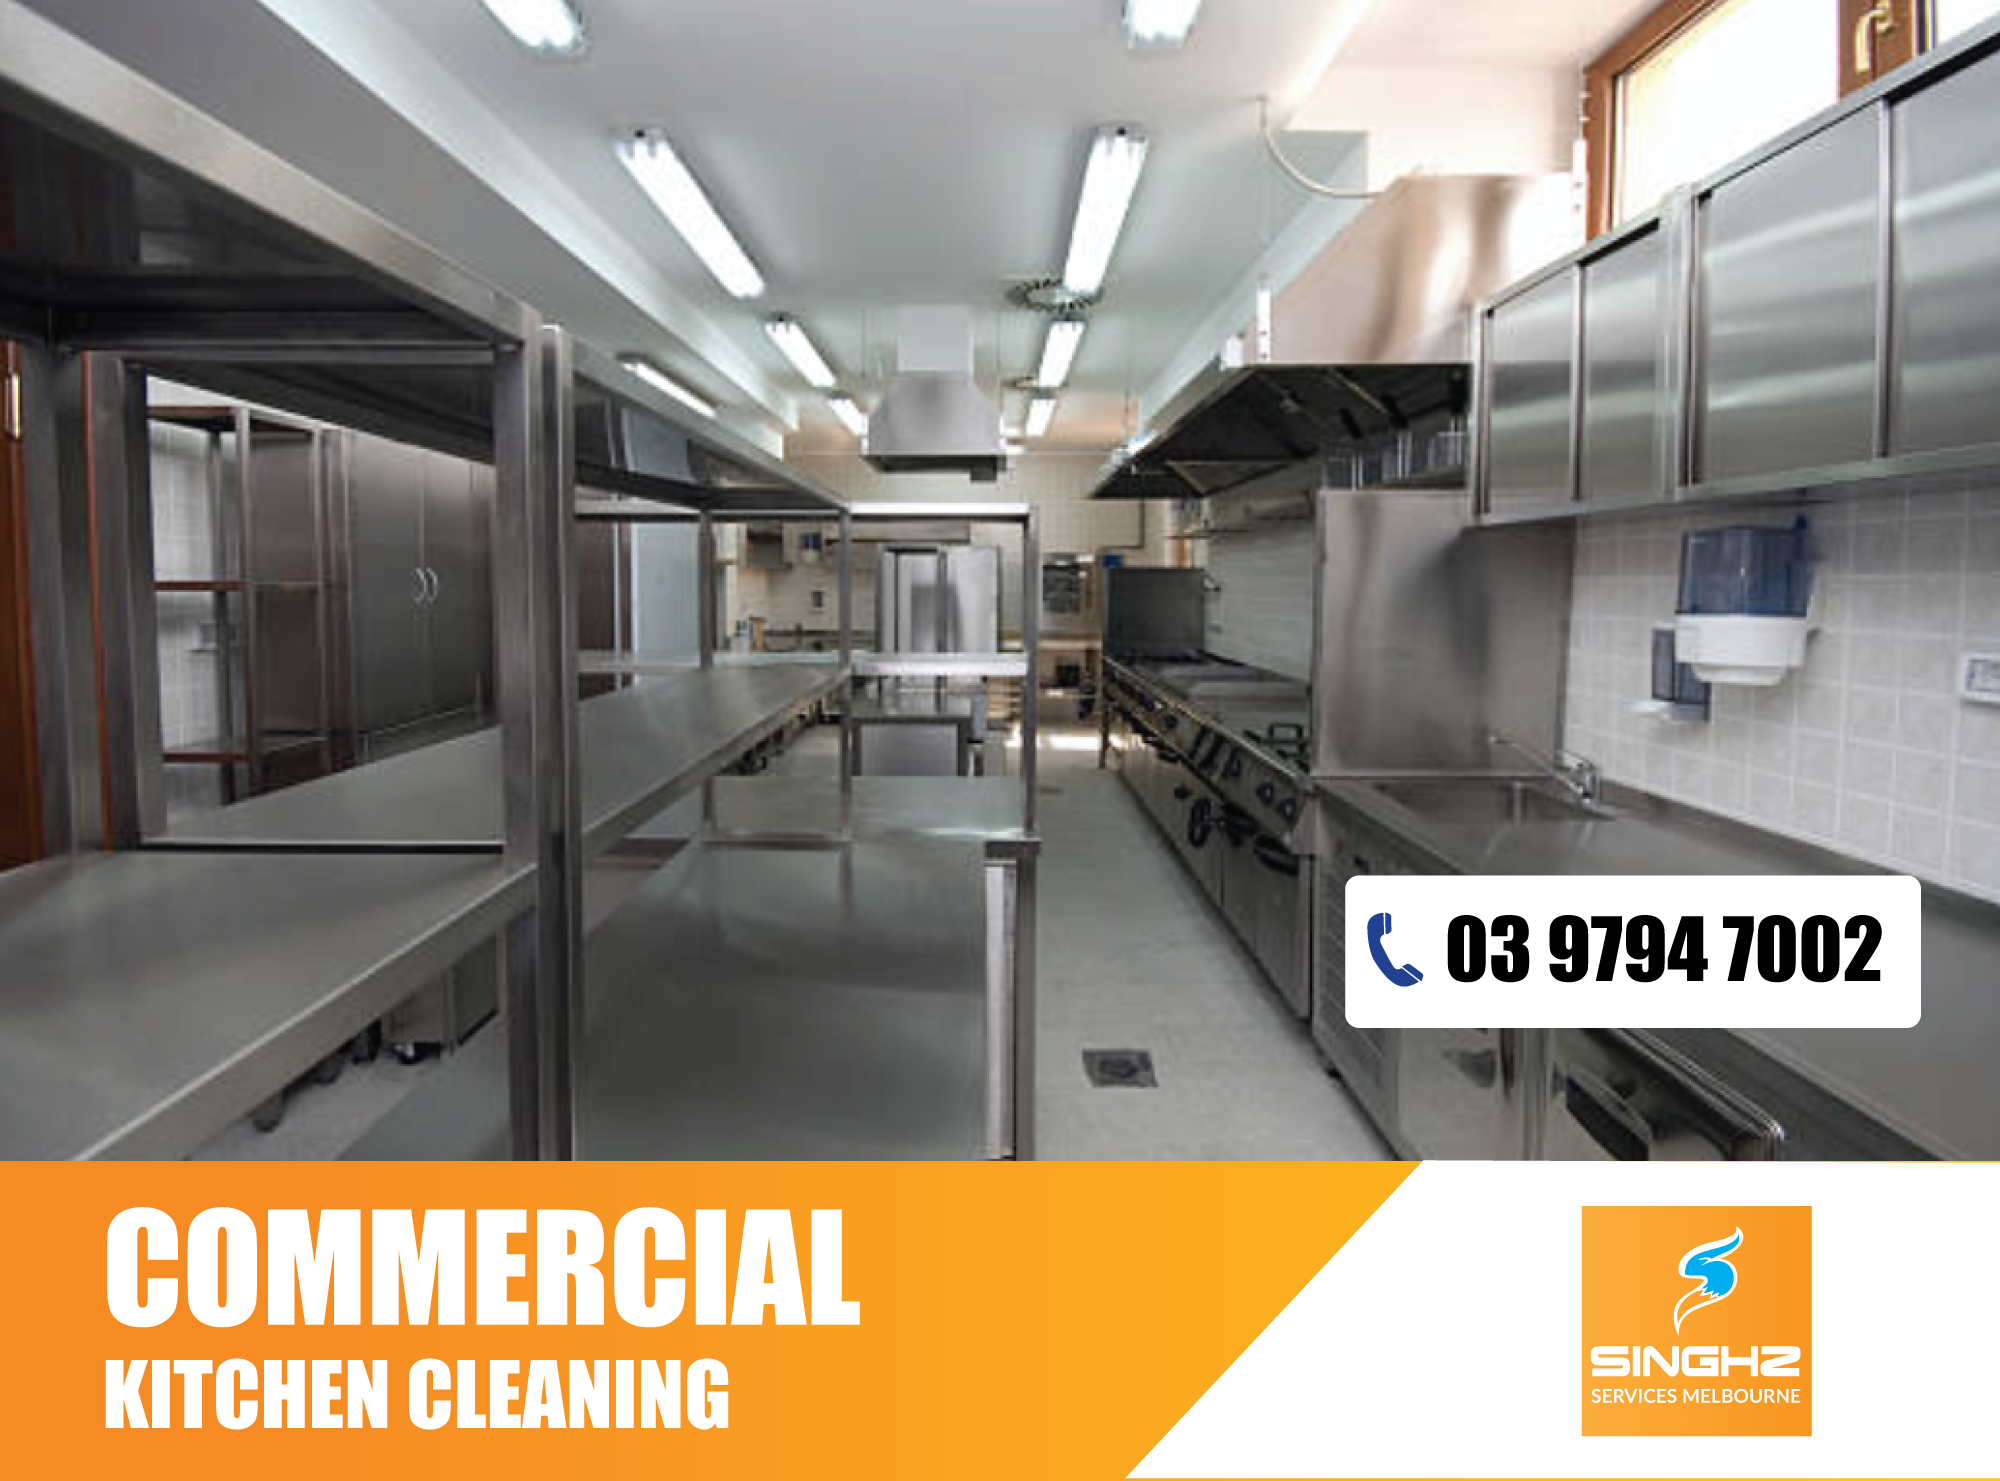 Canopy Cleaning Restaurant Cleaning Kitchen Canopy pertaining to measurements 2000 X 1481